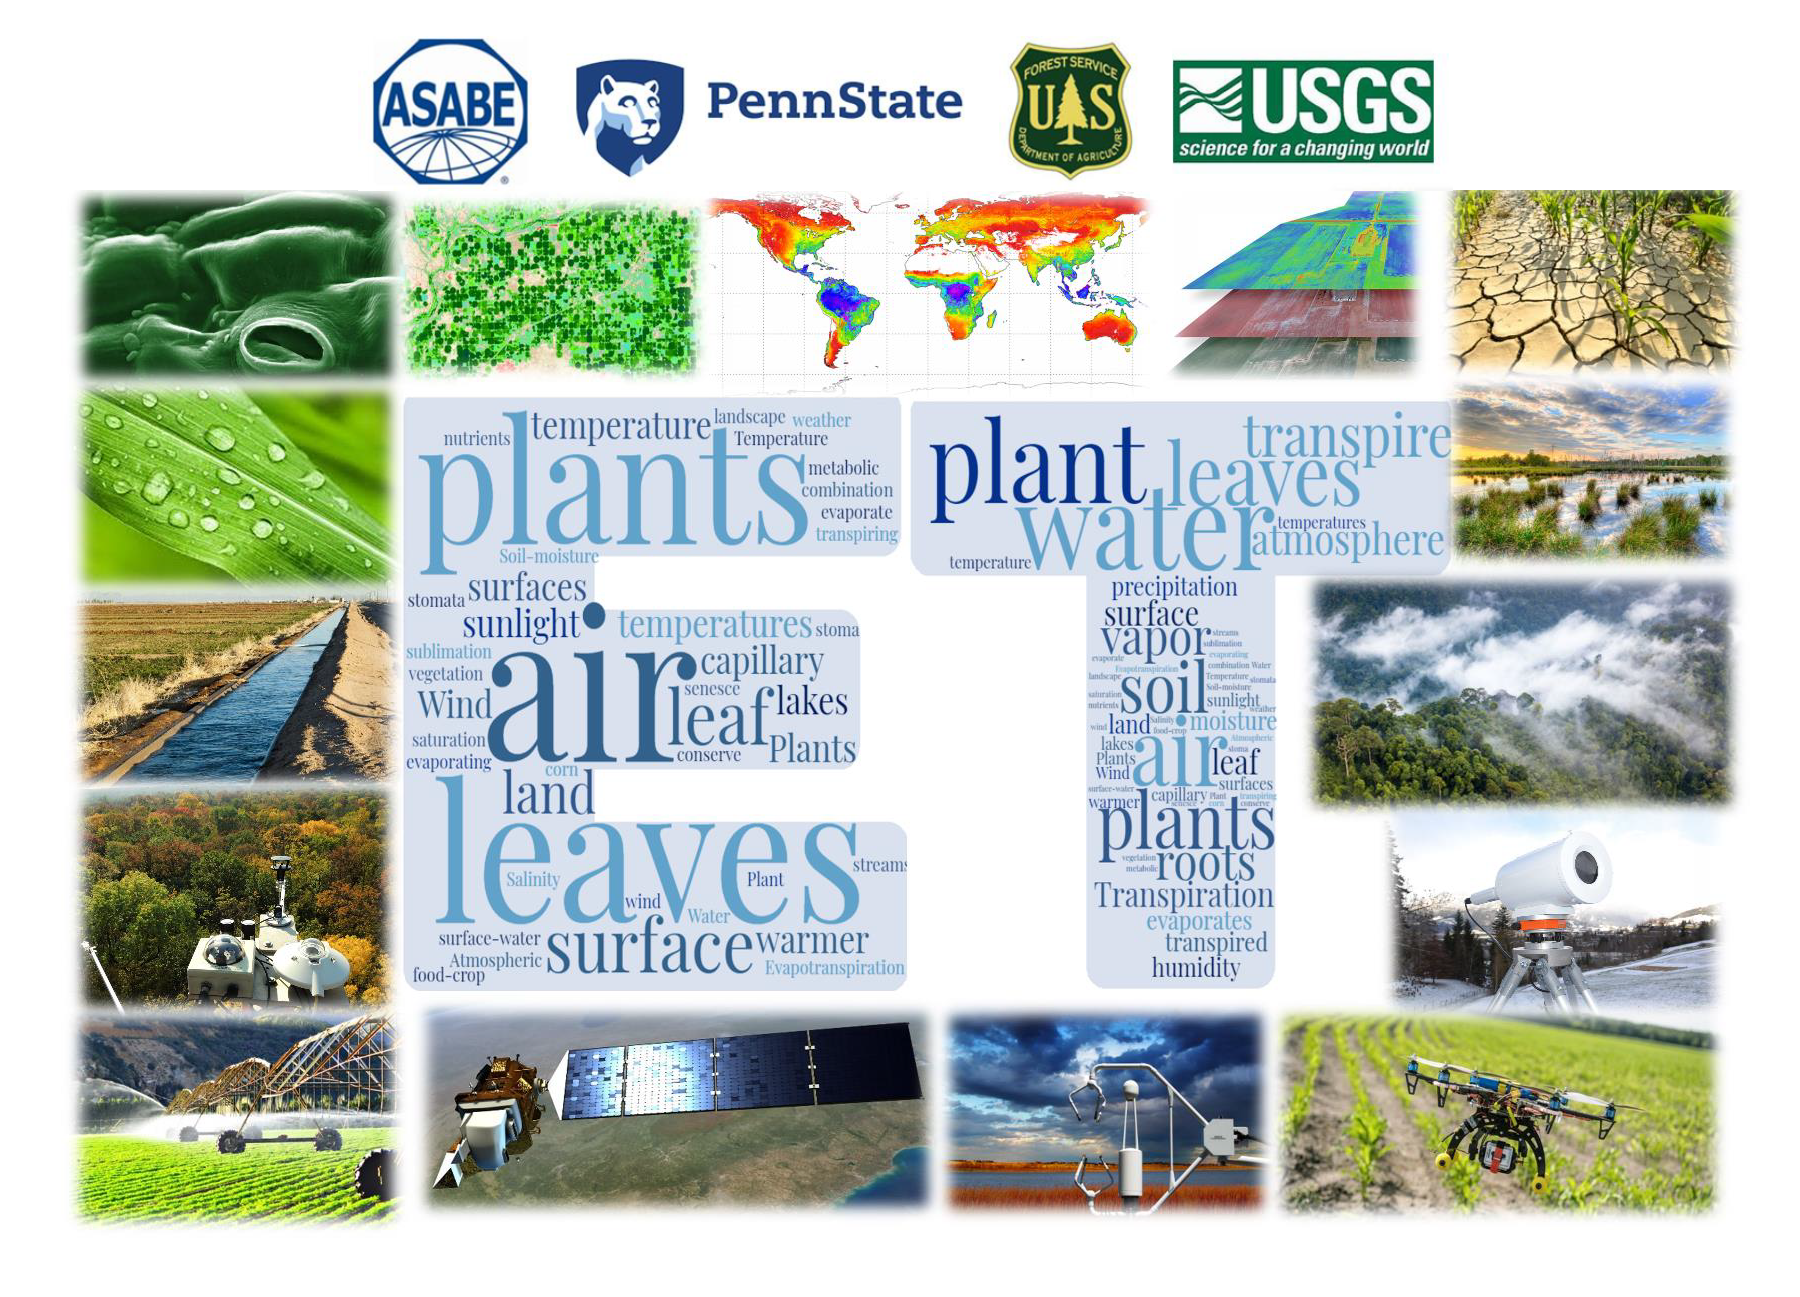 Photo mosaic of plants, leaves, maps, and monitoring tools